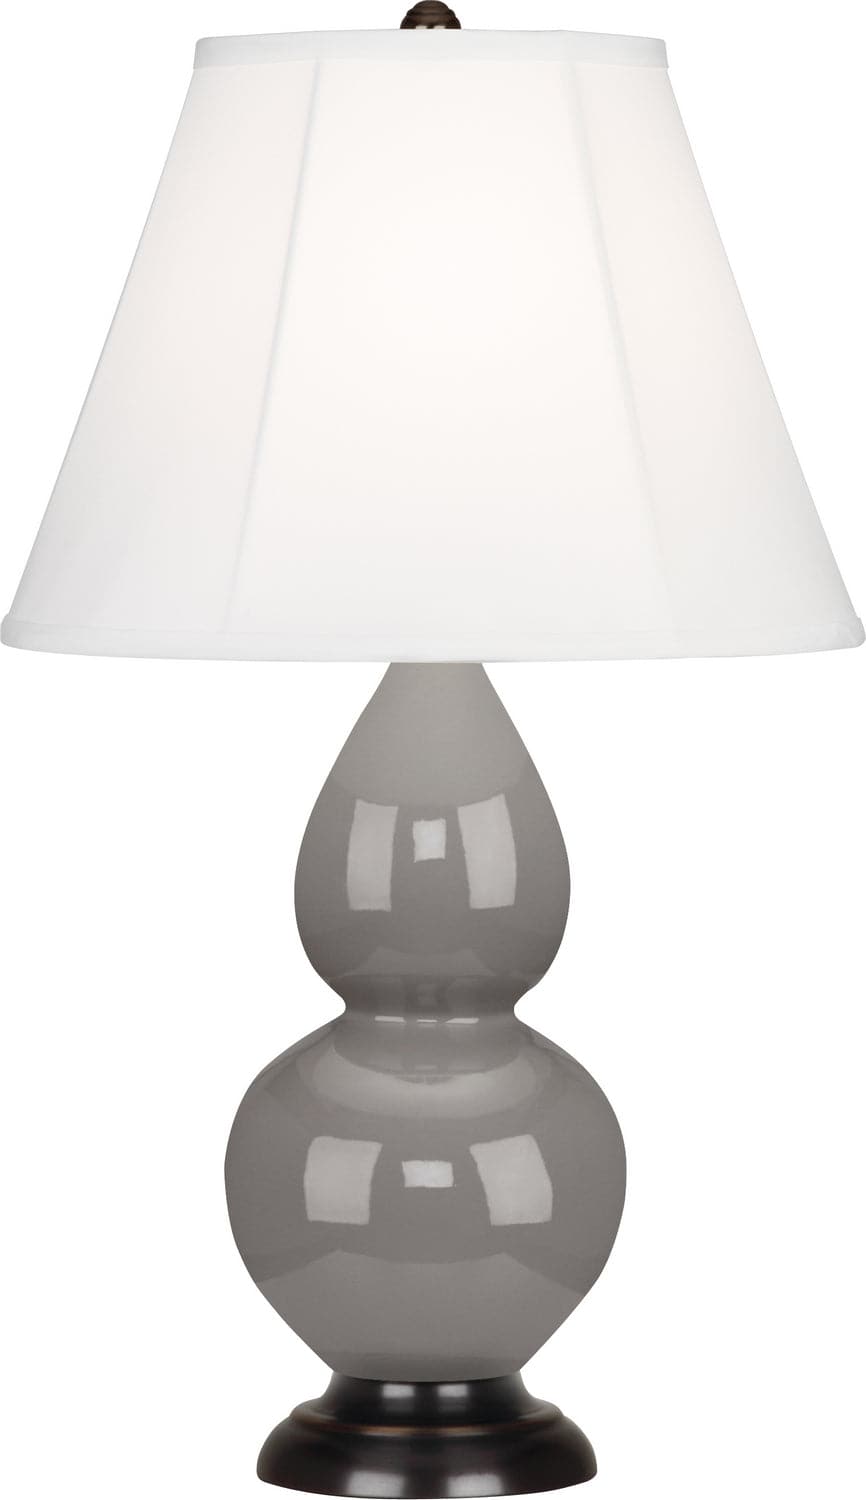 Robert Abbey - 1769 - One Light Accent Lamp - Small Double Gourd - Smoky Taupe Glazed